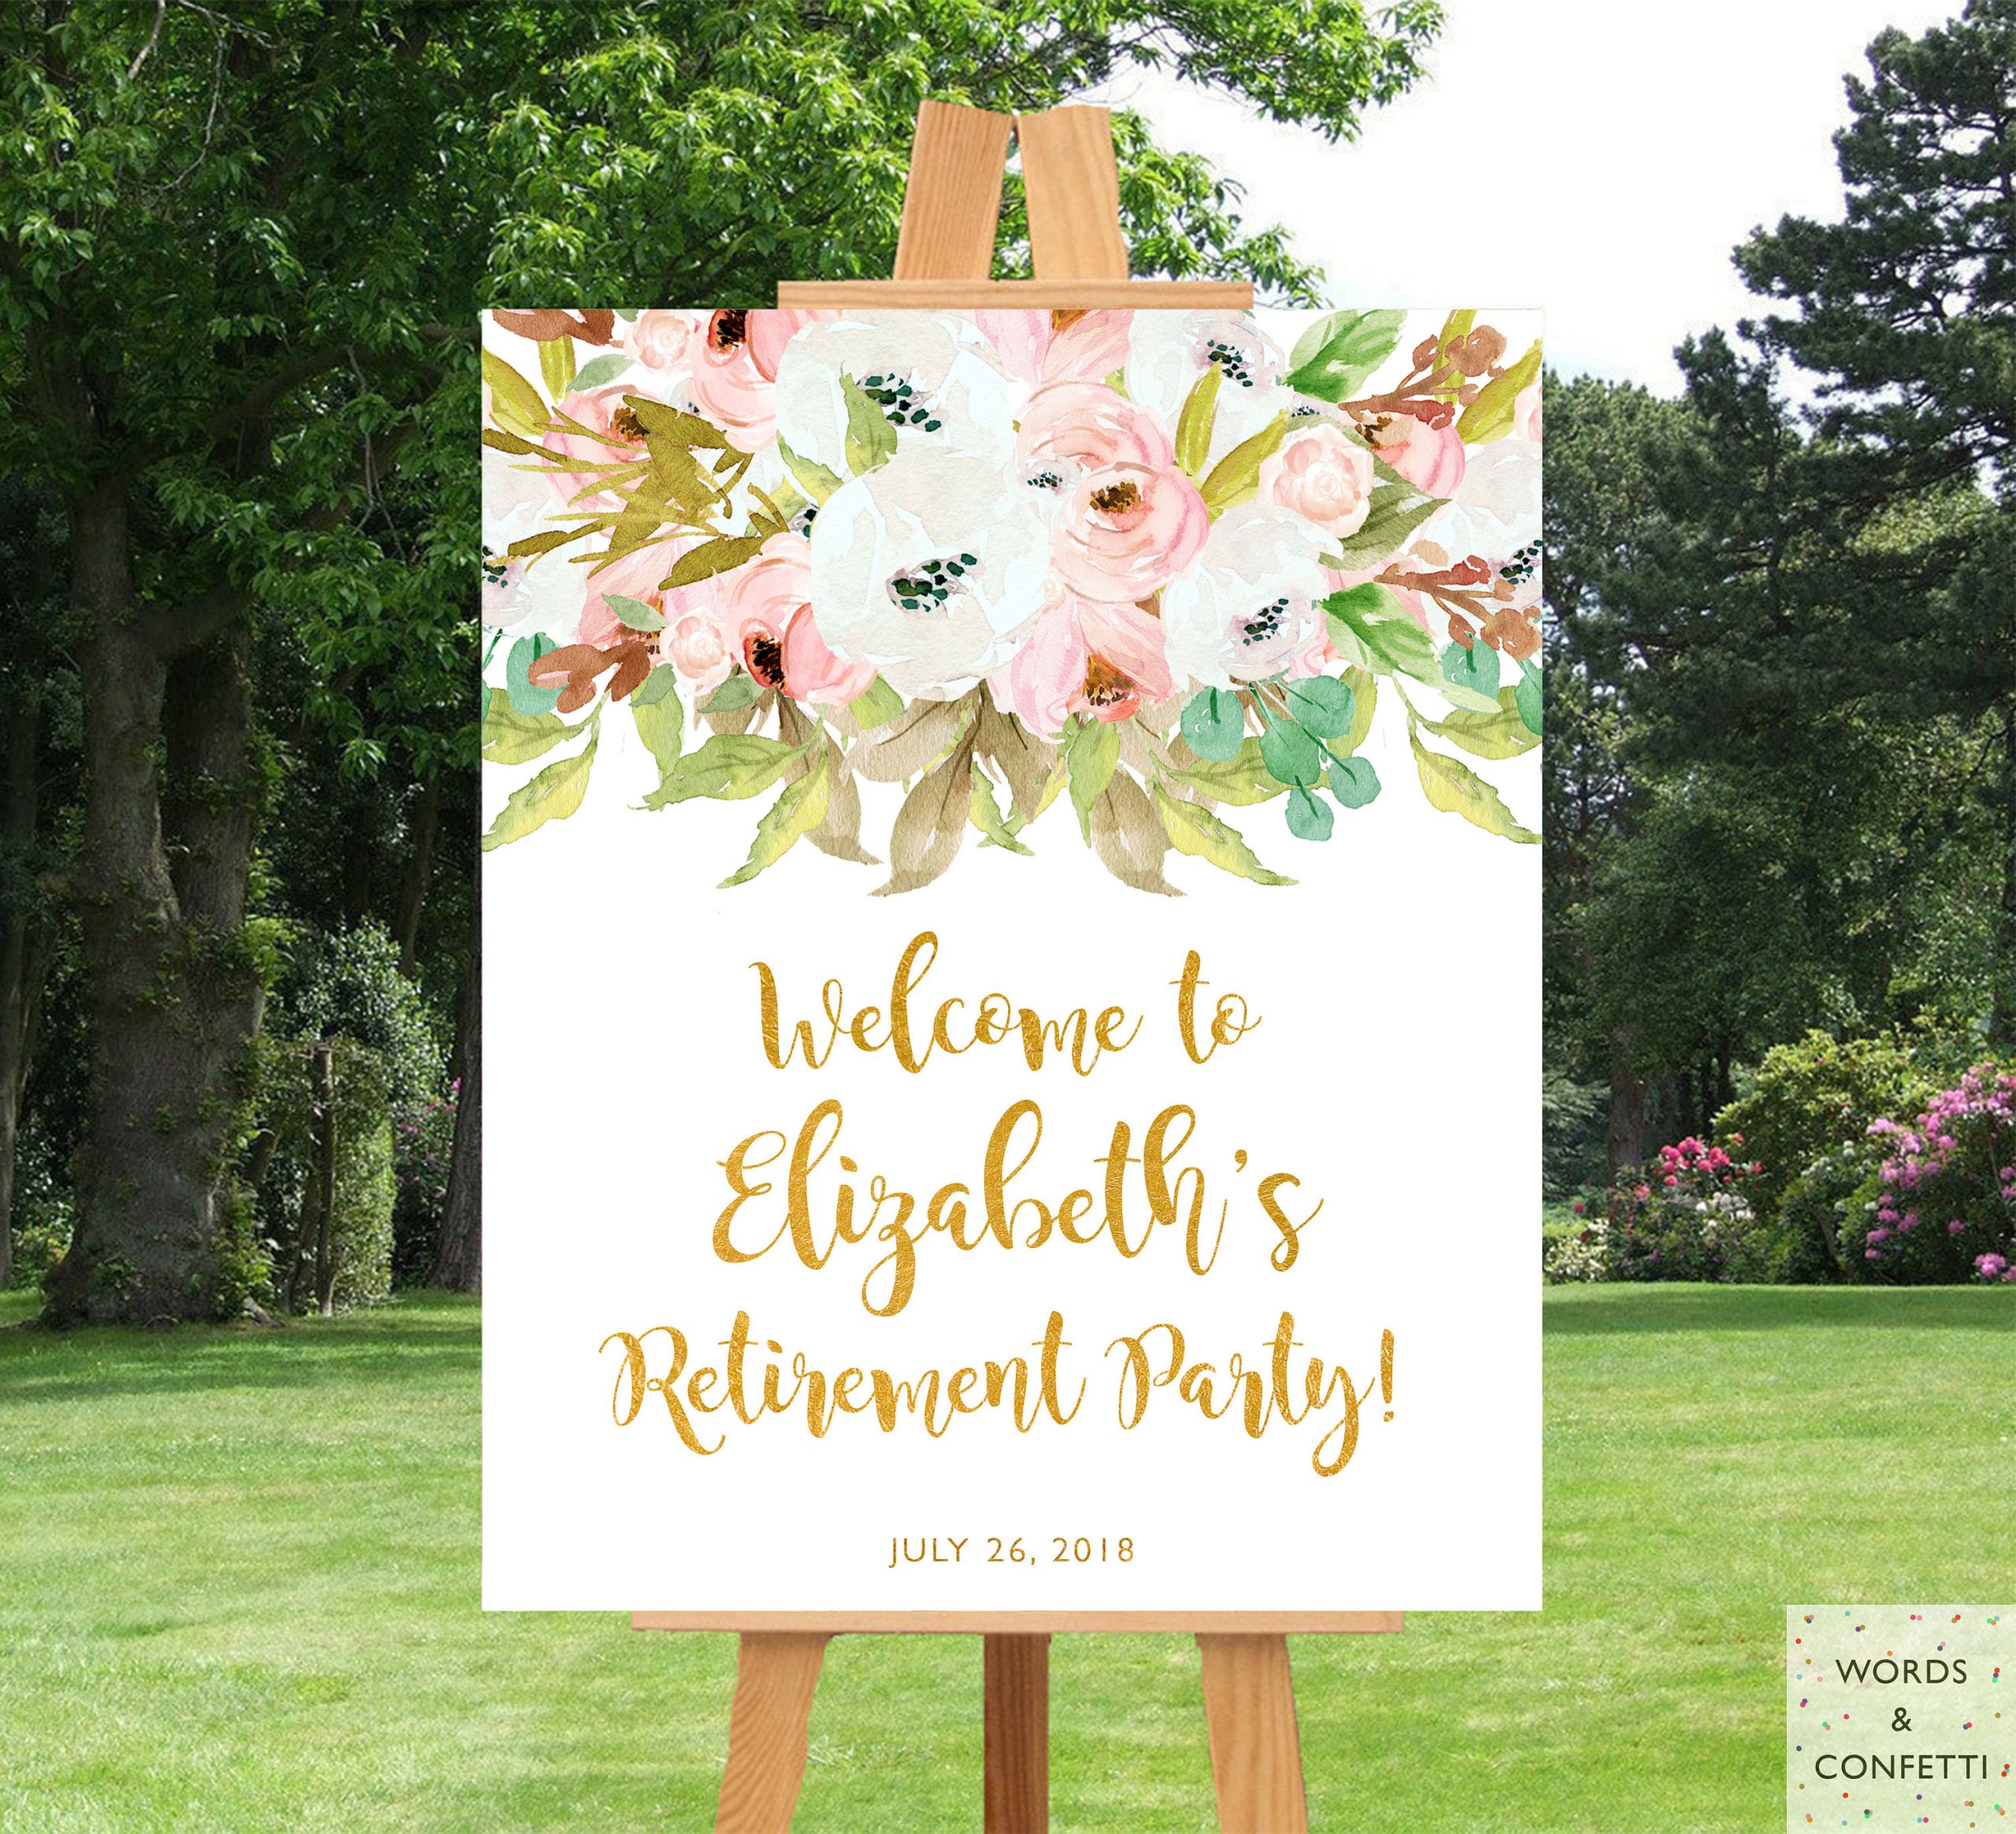 Decorating Ideas For Retirement Party
 Retirement Party Decorations For Women Elegant Retirement